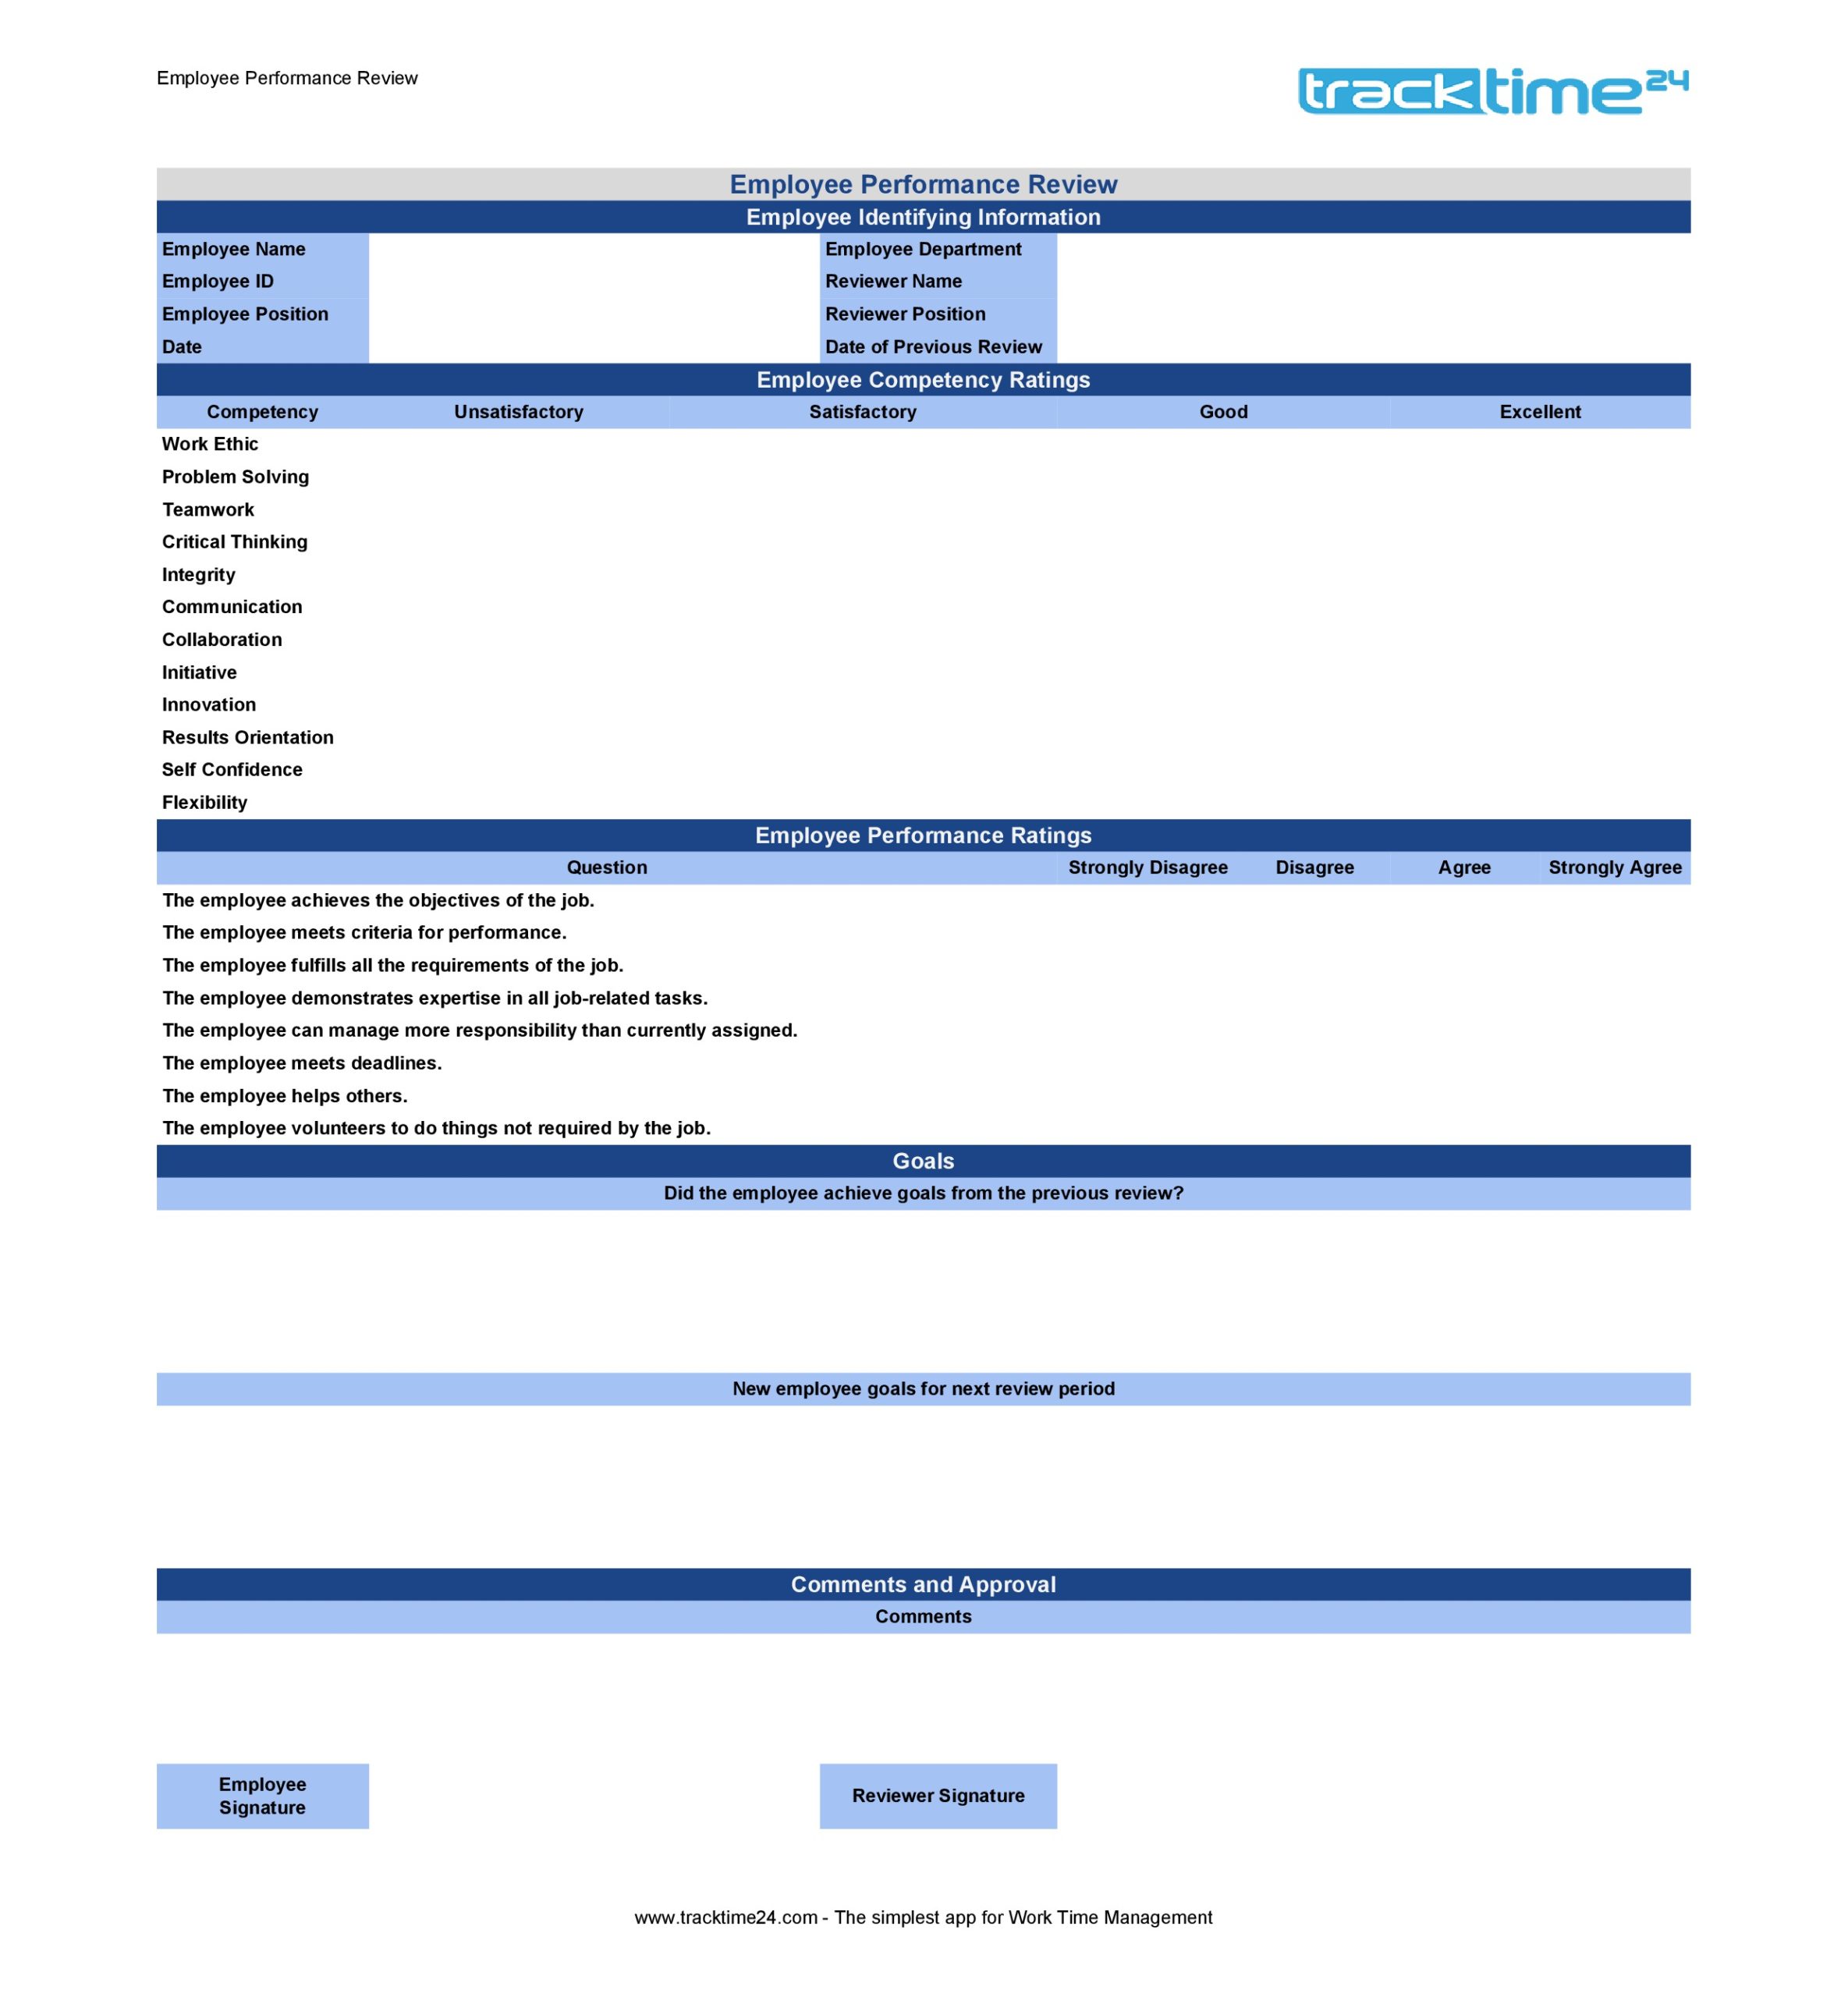 employees-performance-review-template